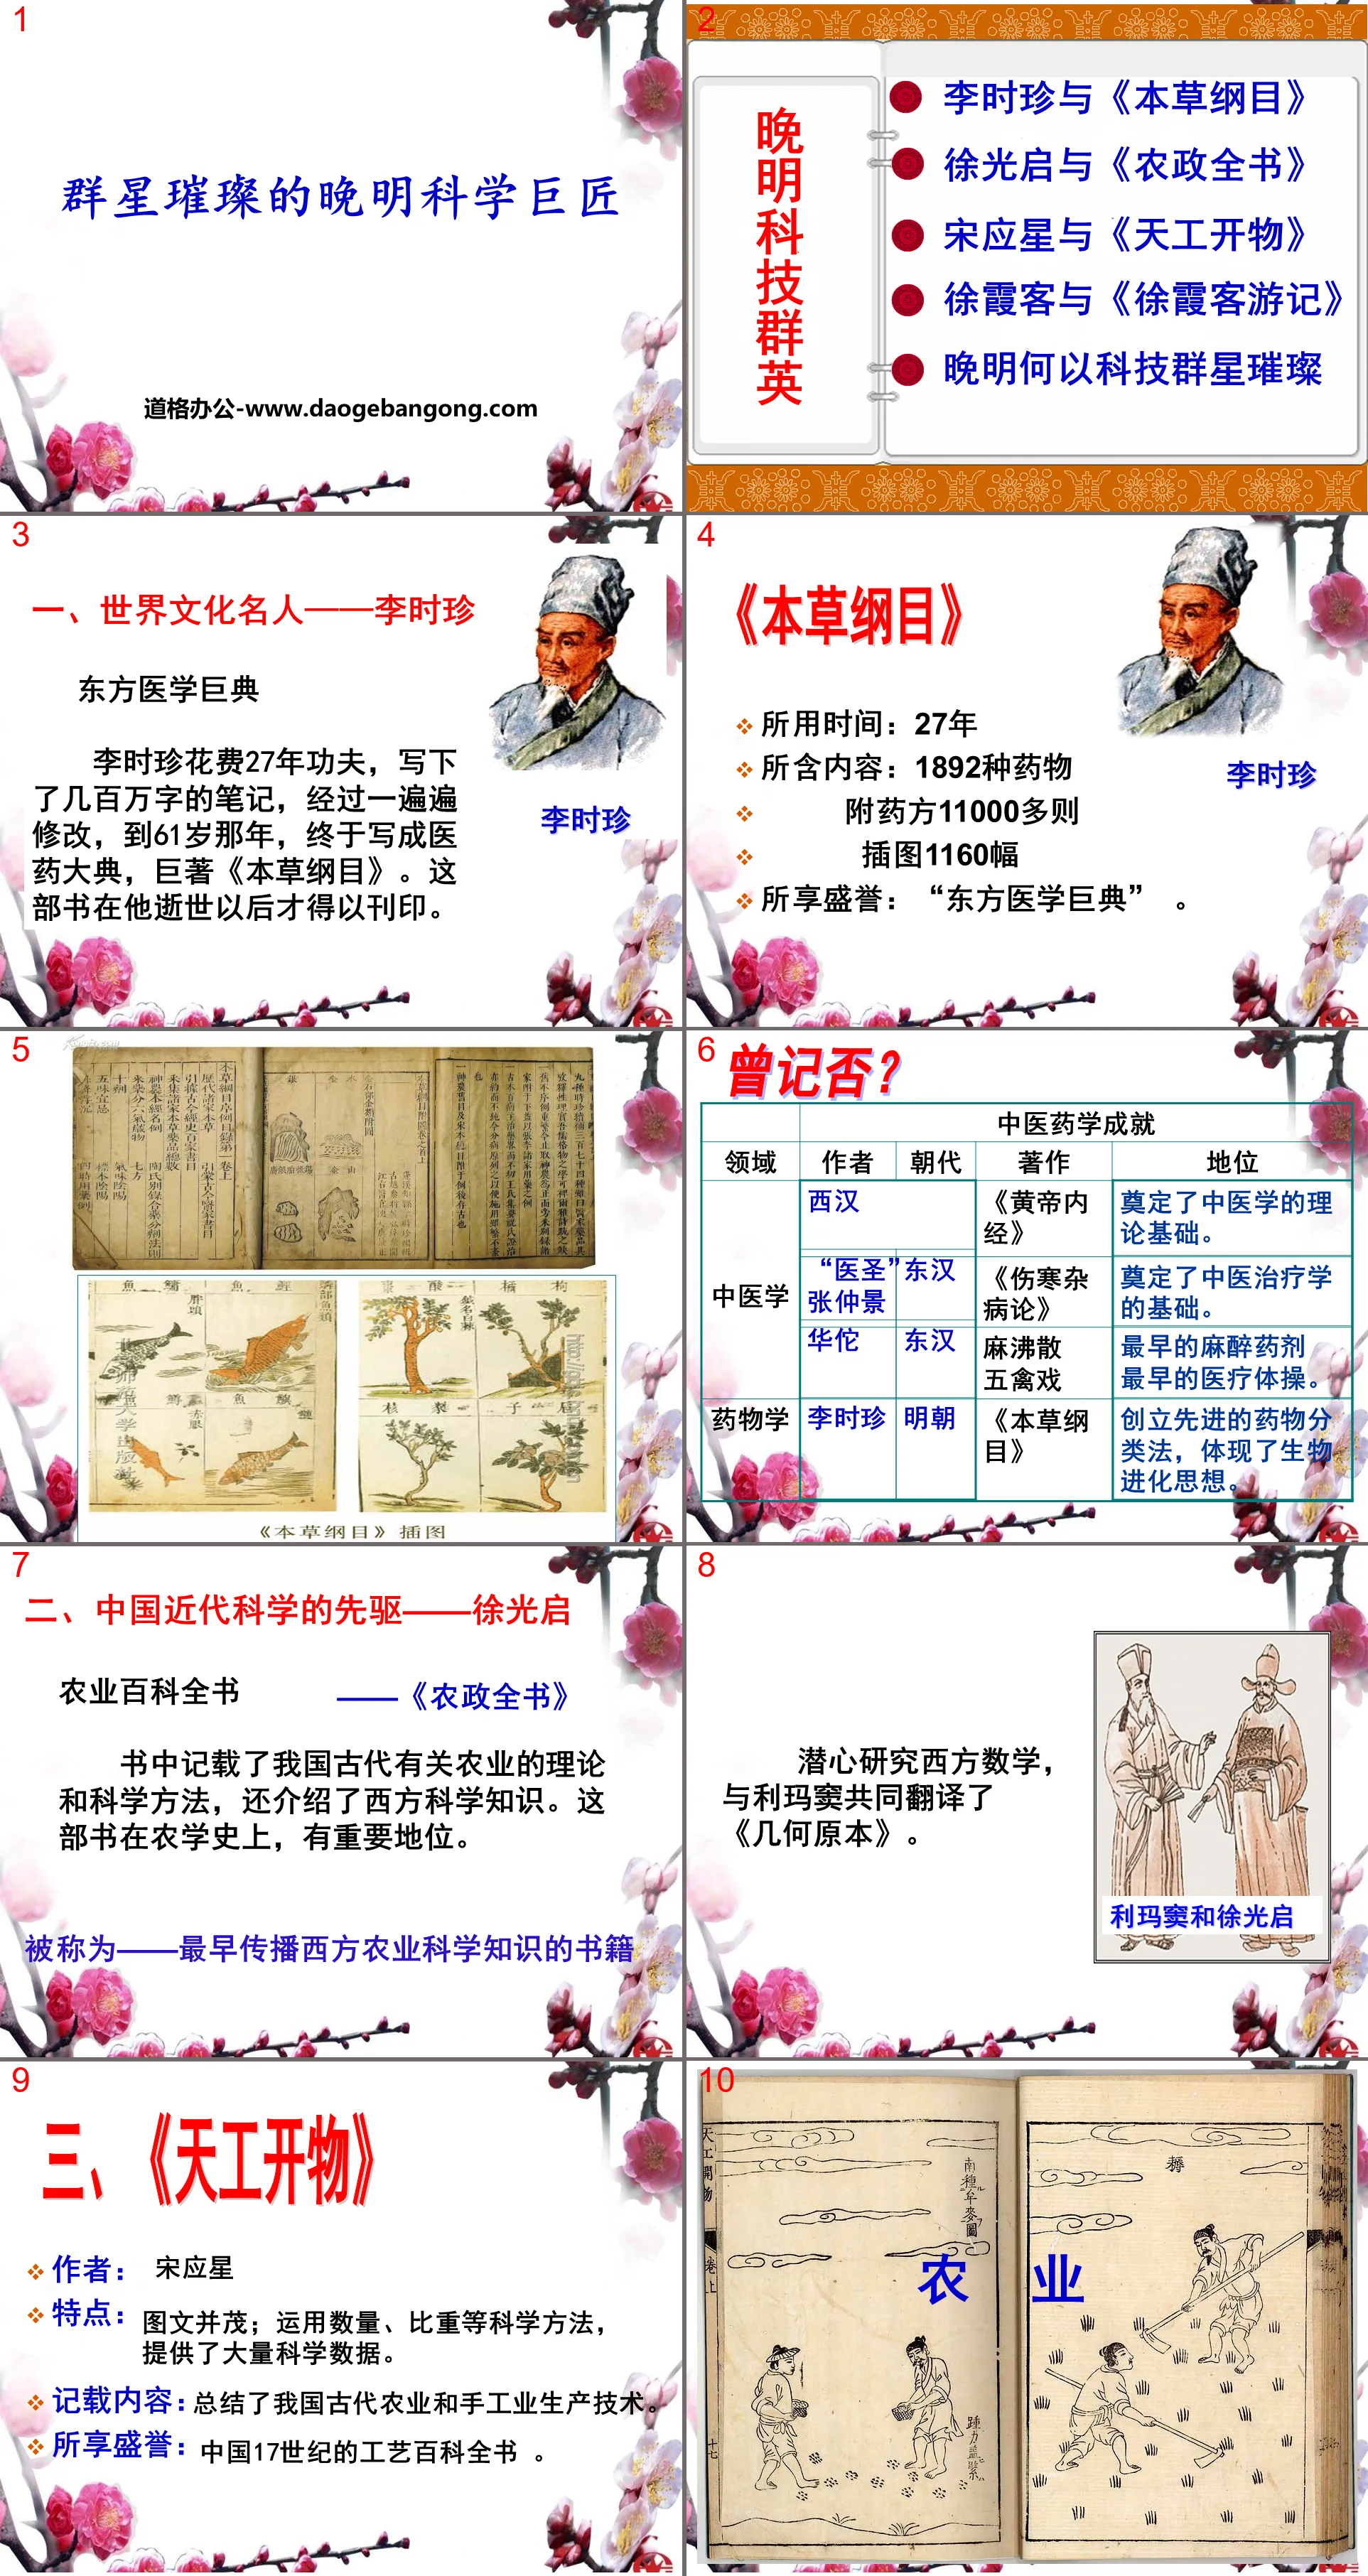 "The Glittering Stars of the Scientific Masters of the Late Ming Dynasty" PPT of Ming and Qing culture interweaving the old and the new